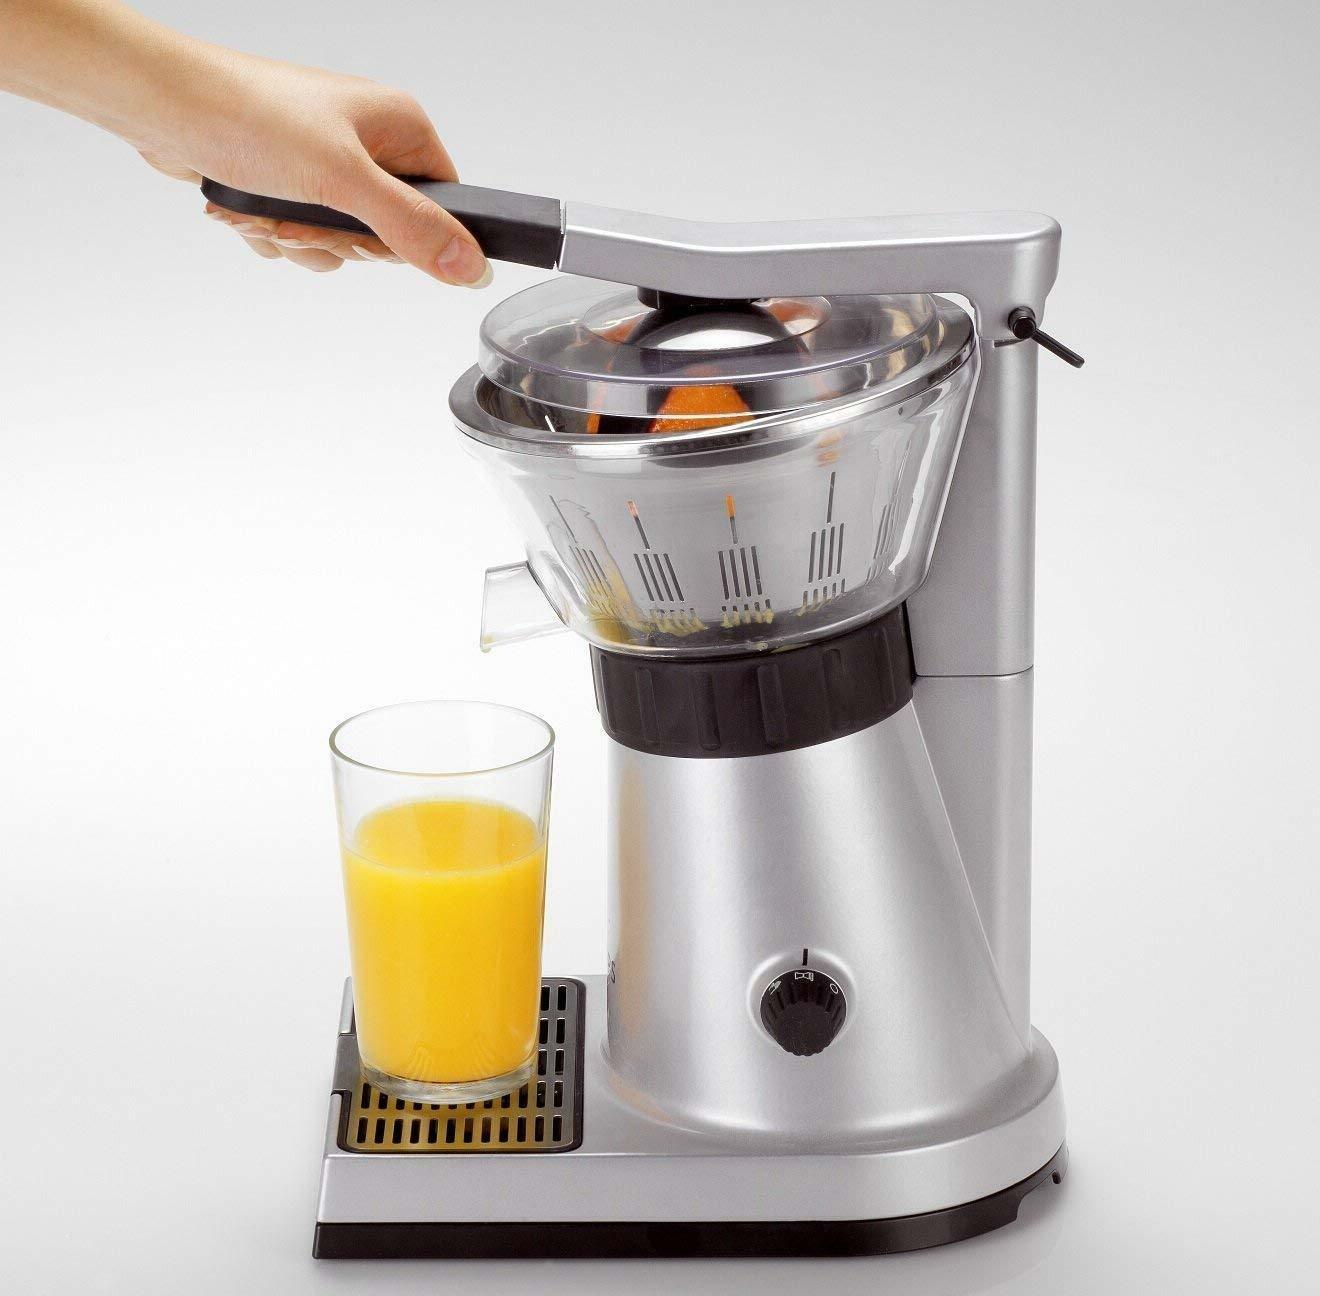 Krups Citrus Press ZX7000 Juicer With Cap And Clip for Attaching Citrus 130W - $410.98